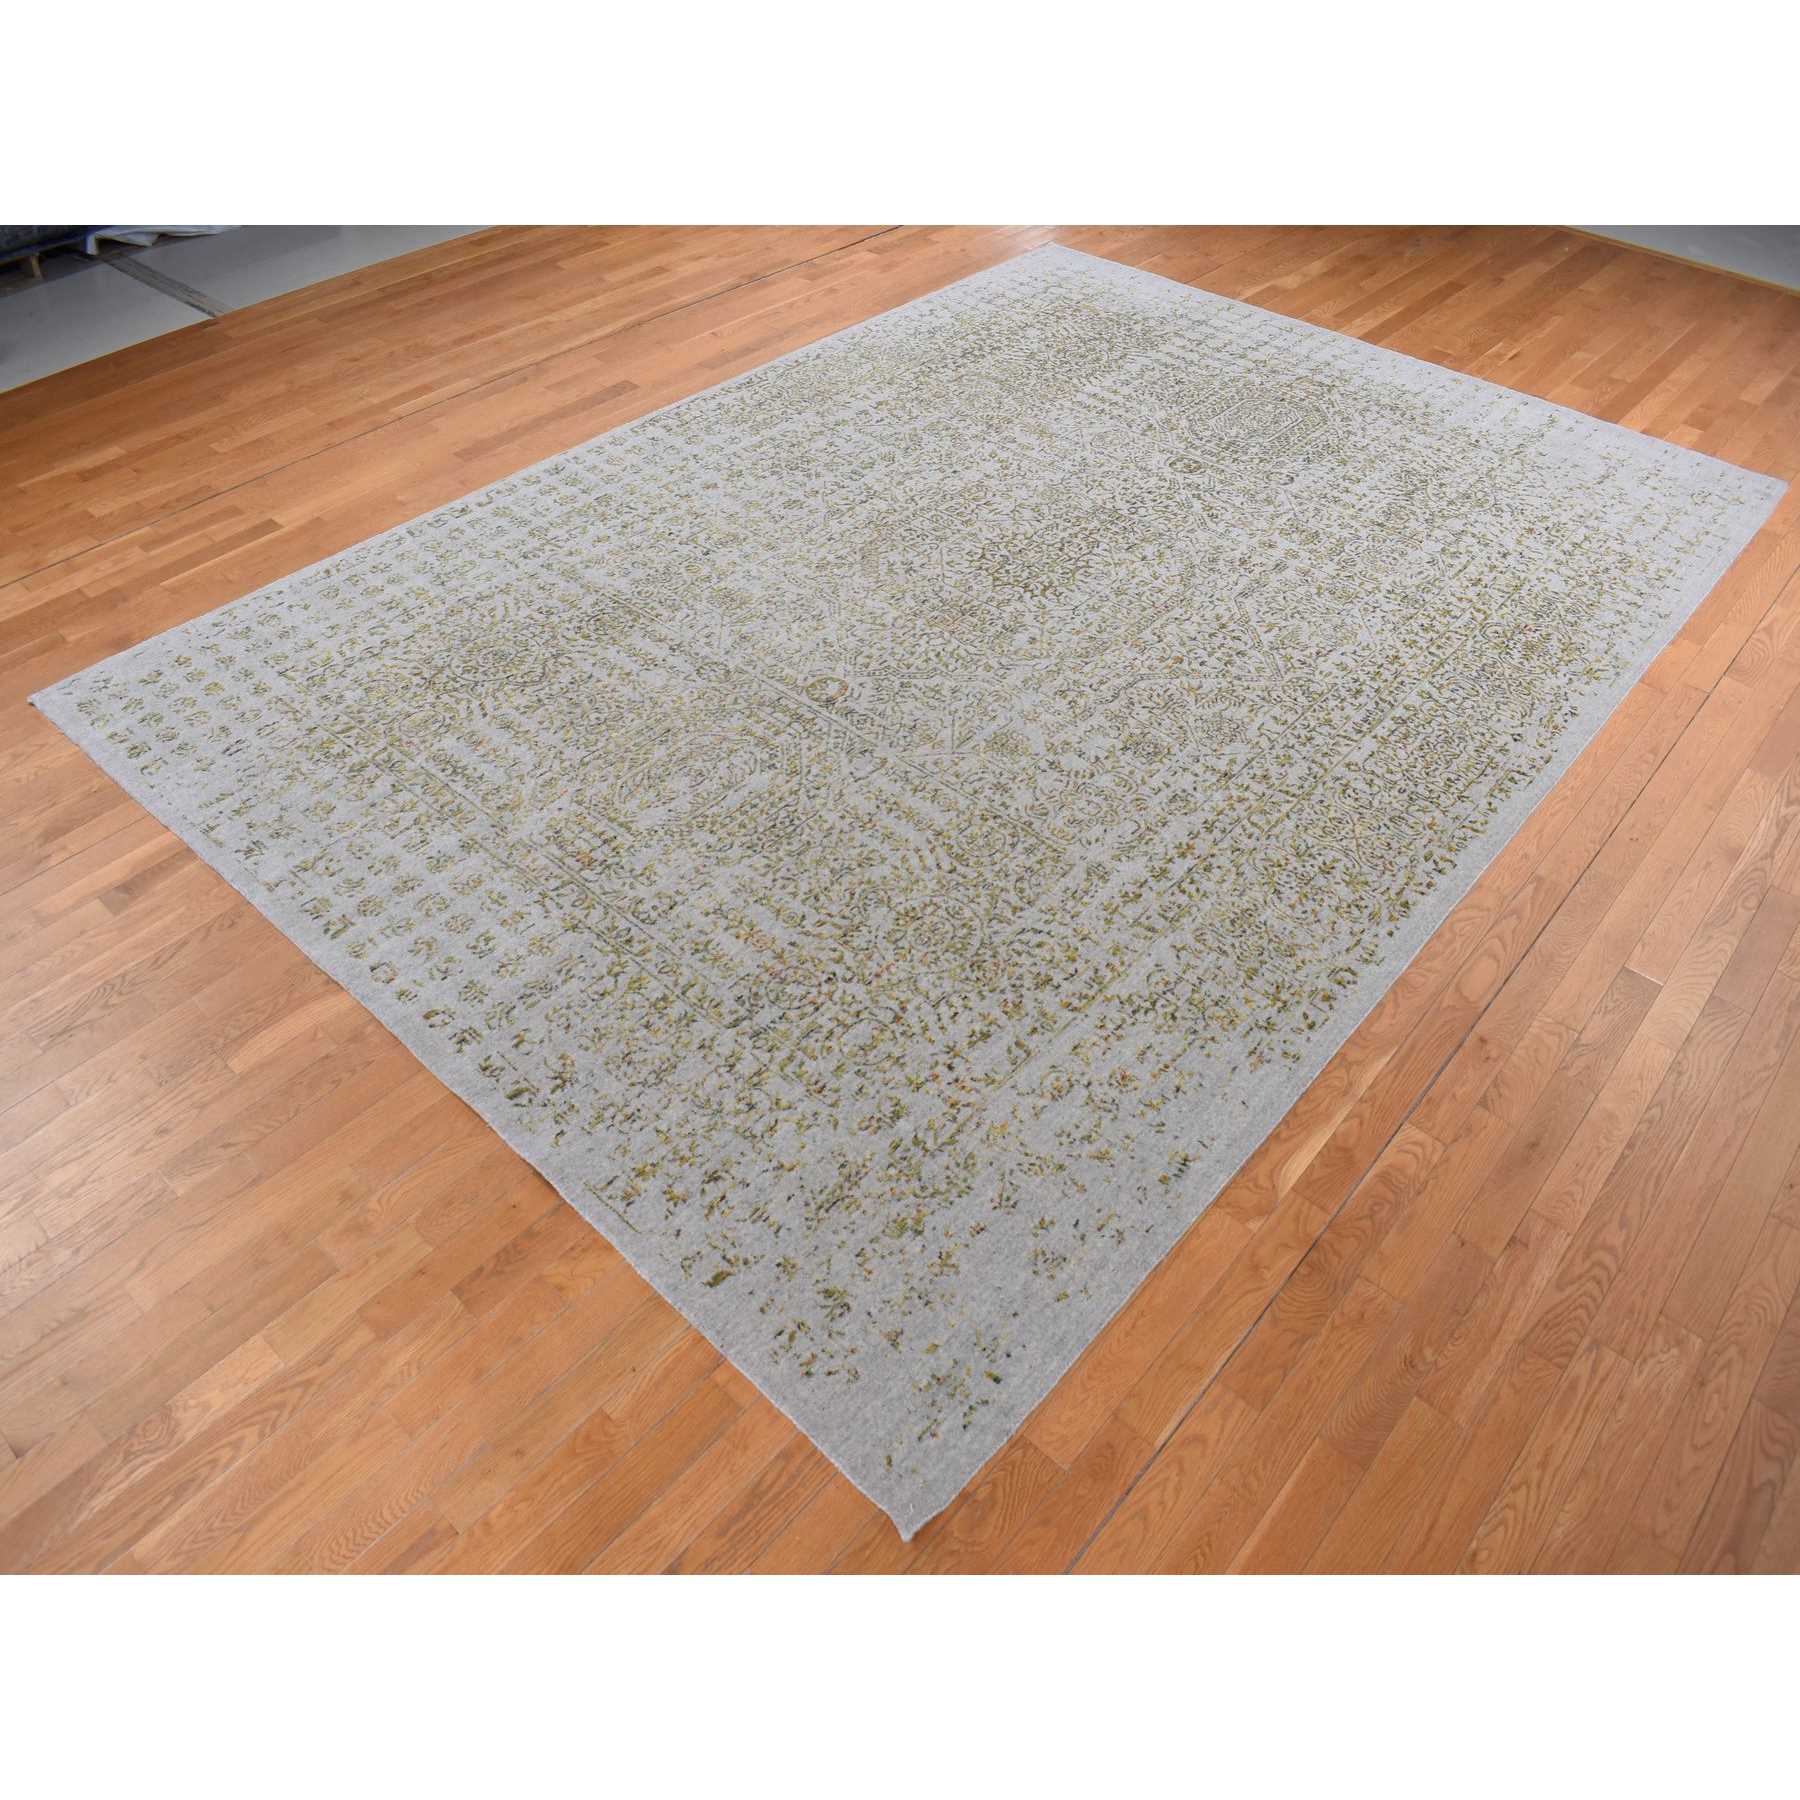 Transitional-Hand-Loomed-Rug-435560